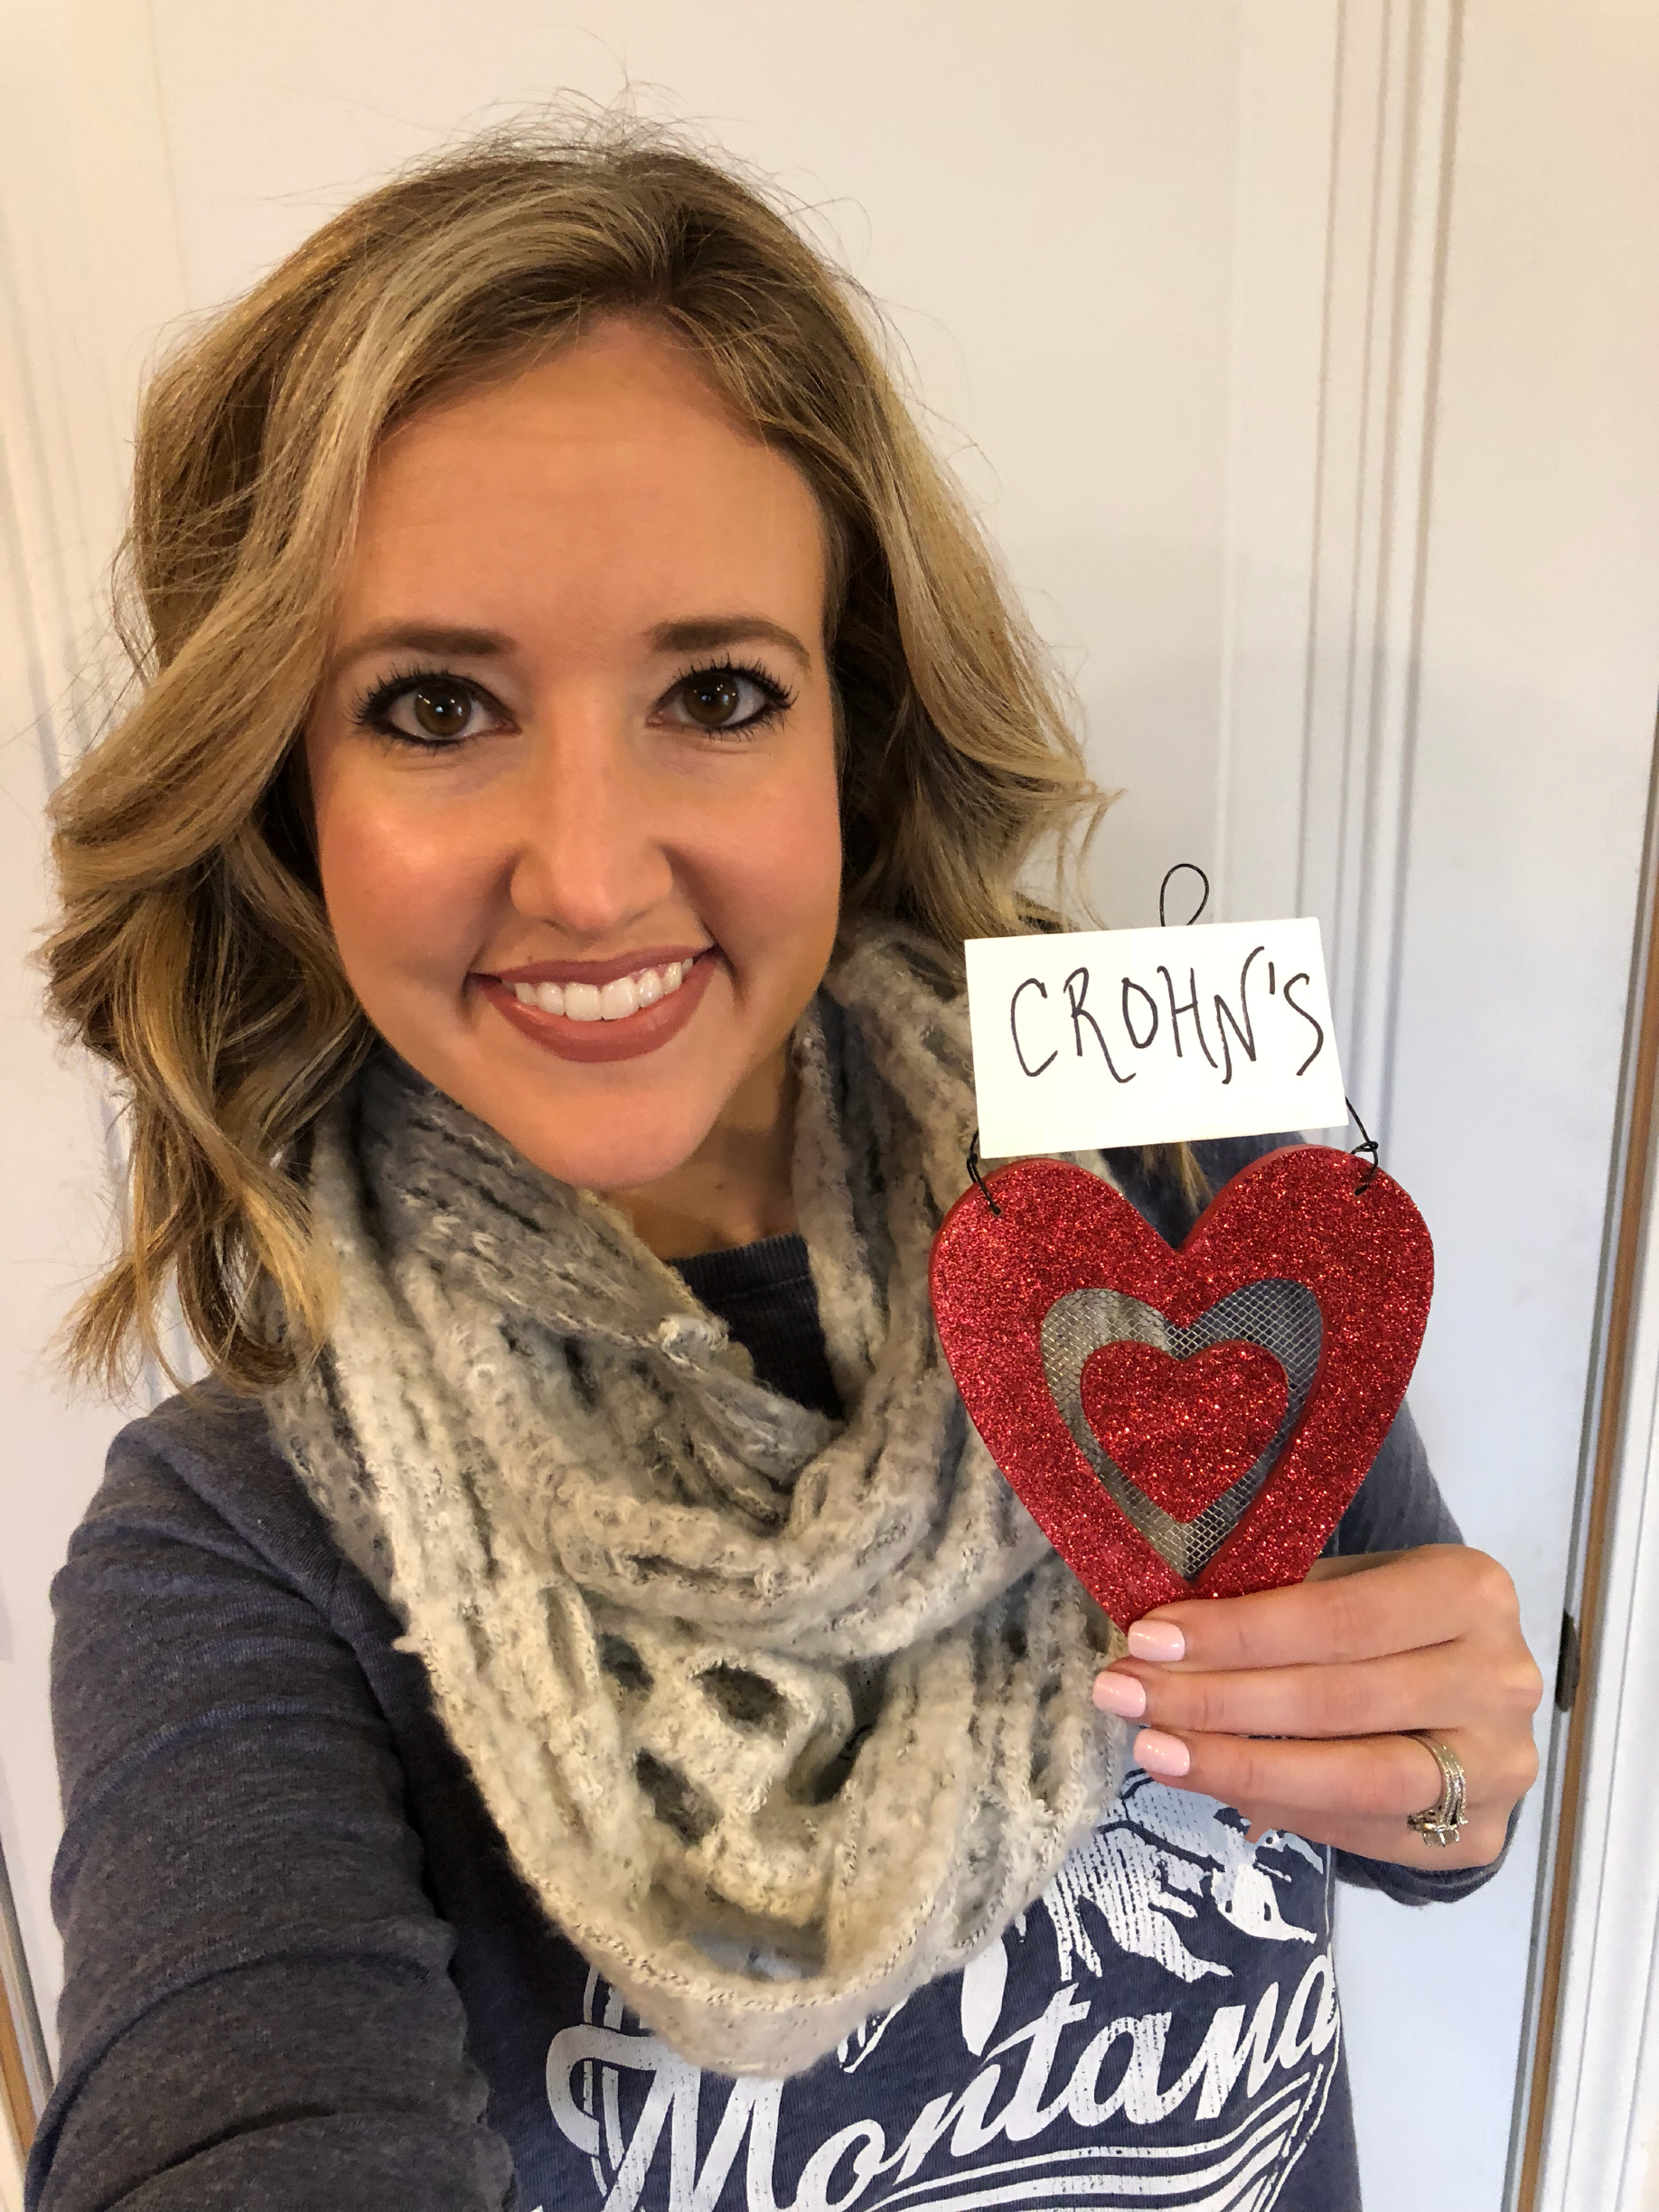 A photo of the writer holding a heart with "Crohn's" written above it.